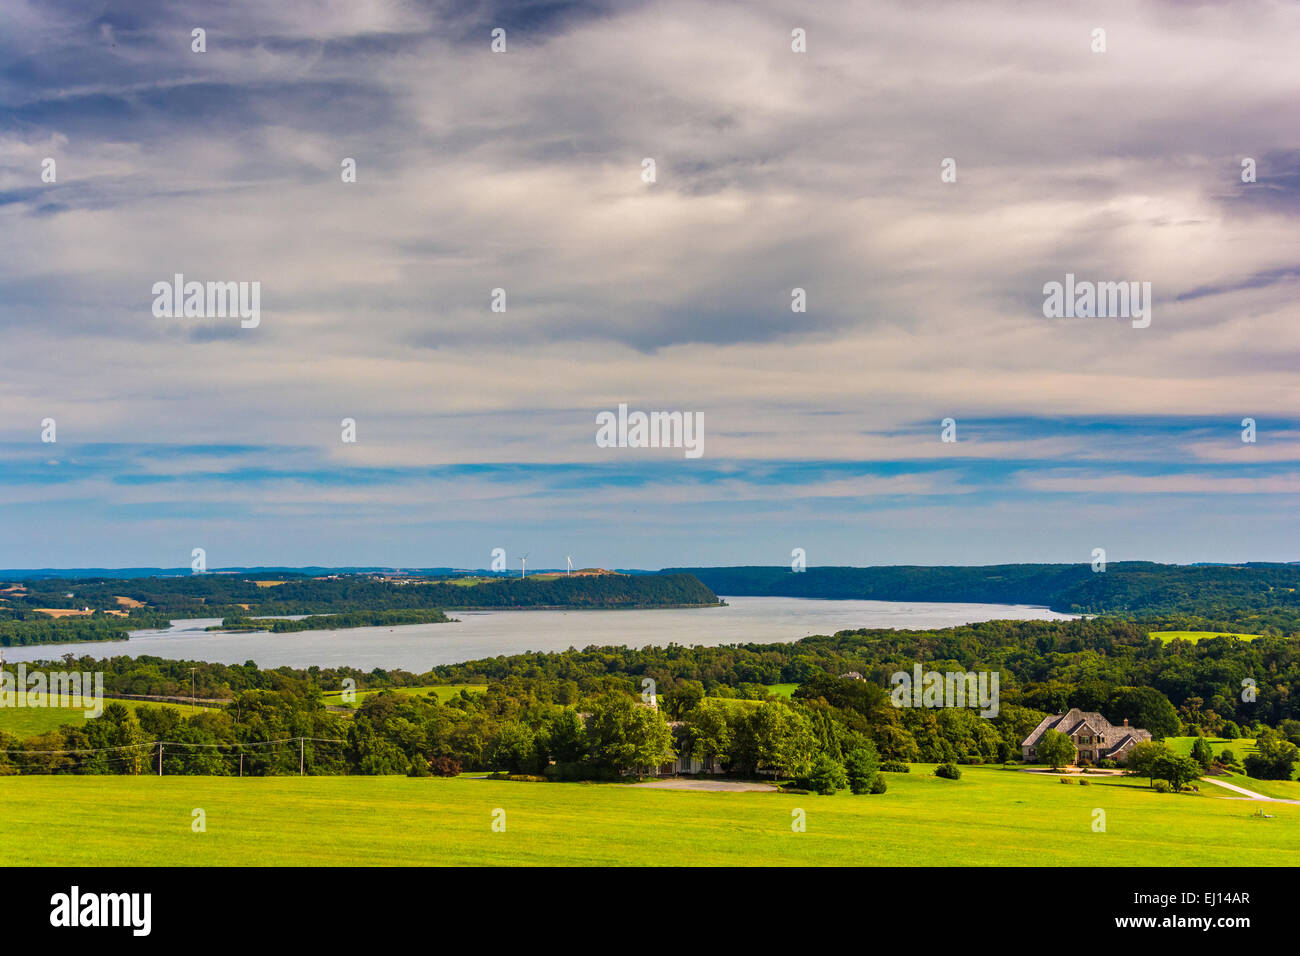 View of the Susquehanna River from High Point in Eastern York County, Pennsylvania. Stock Photo